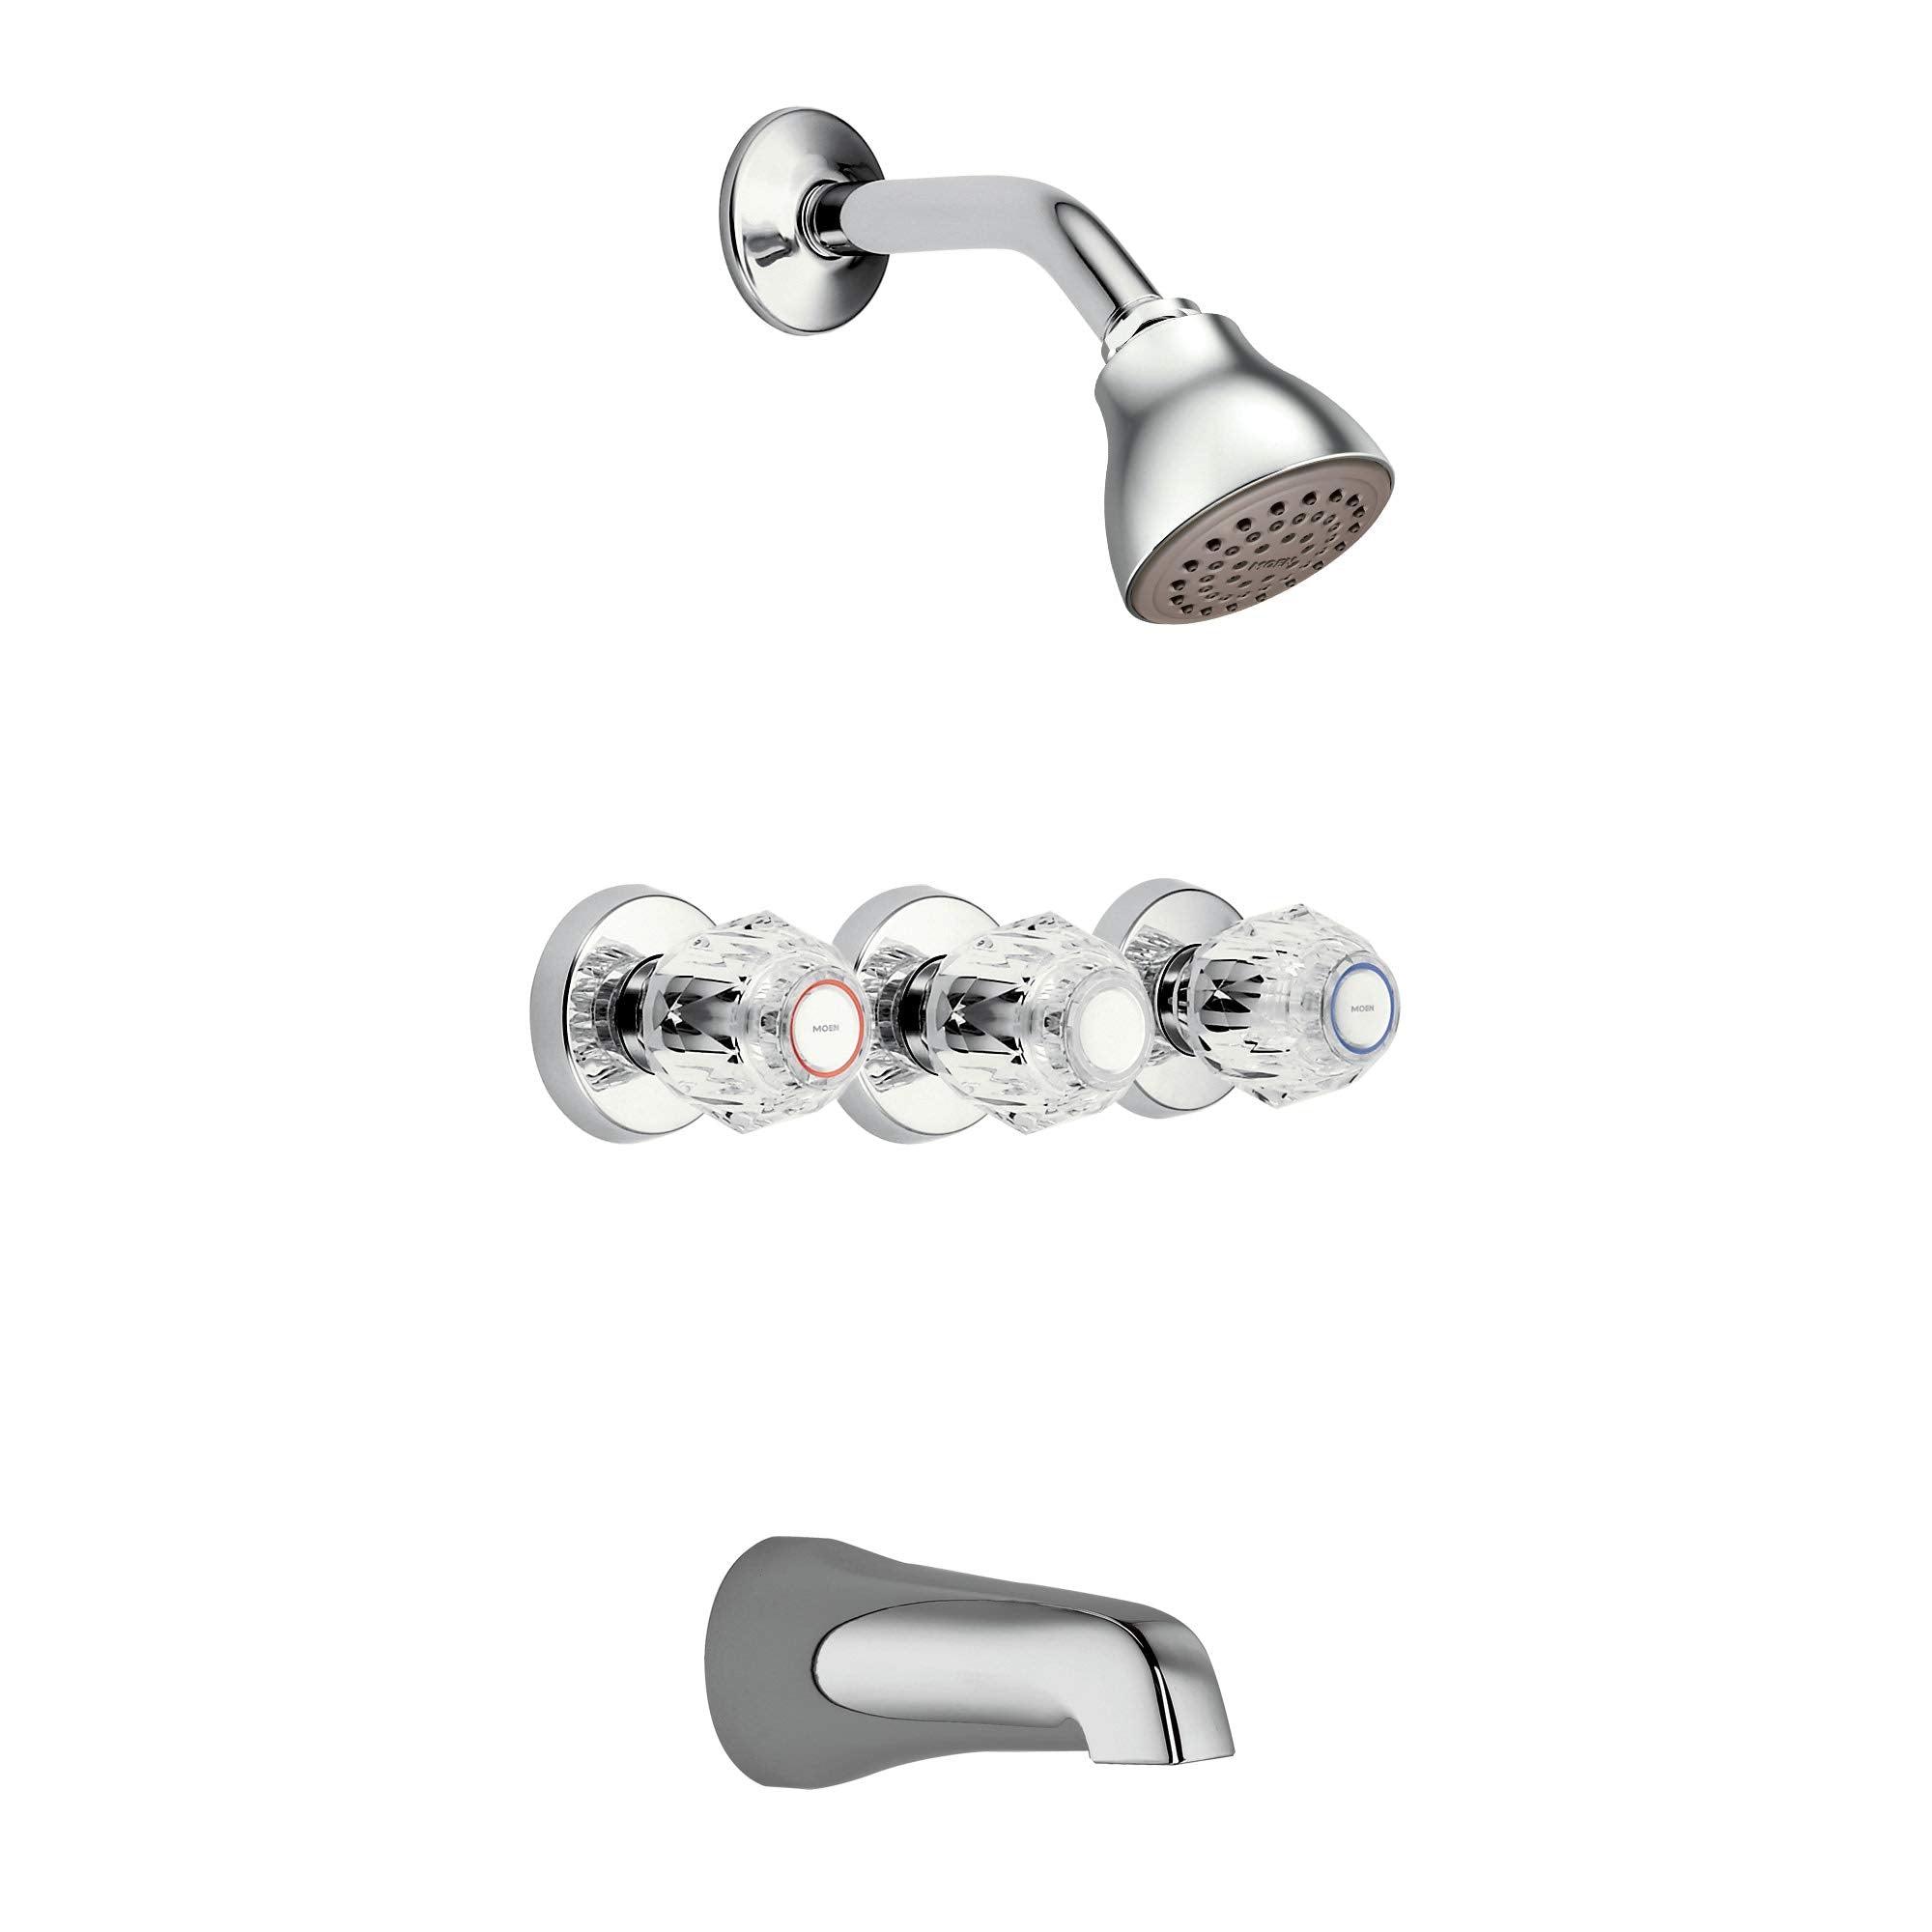 Moen 2995EP Chateau Three-Handle Tub and Eco-Performance Shower Faucet w/Valve (7629558448366)